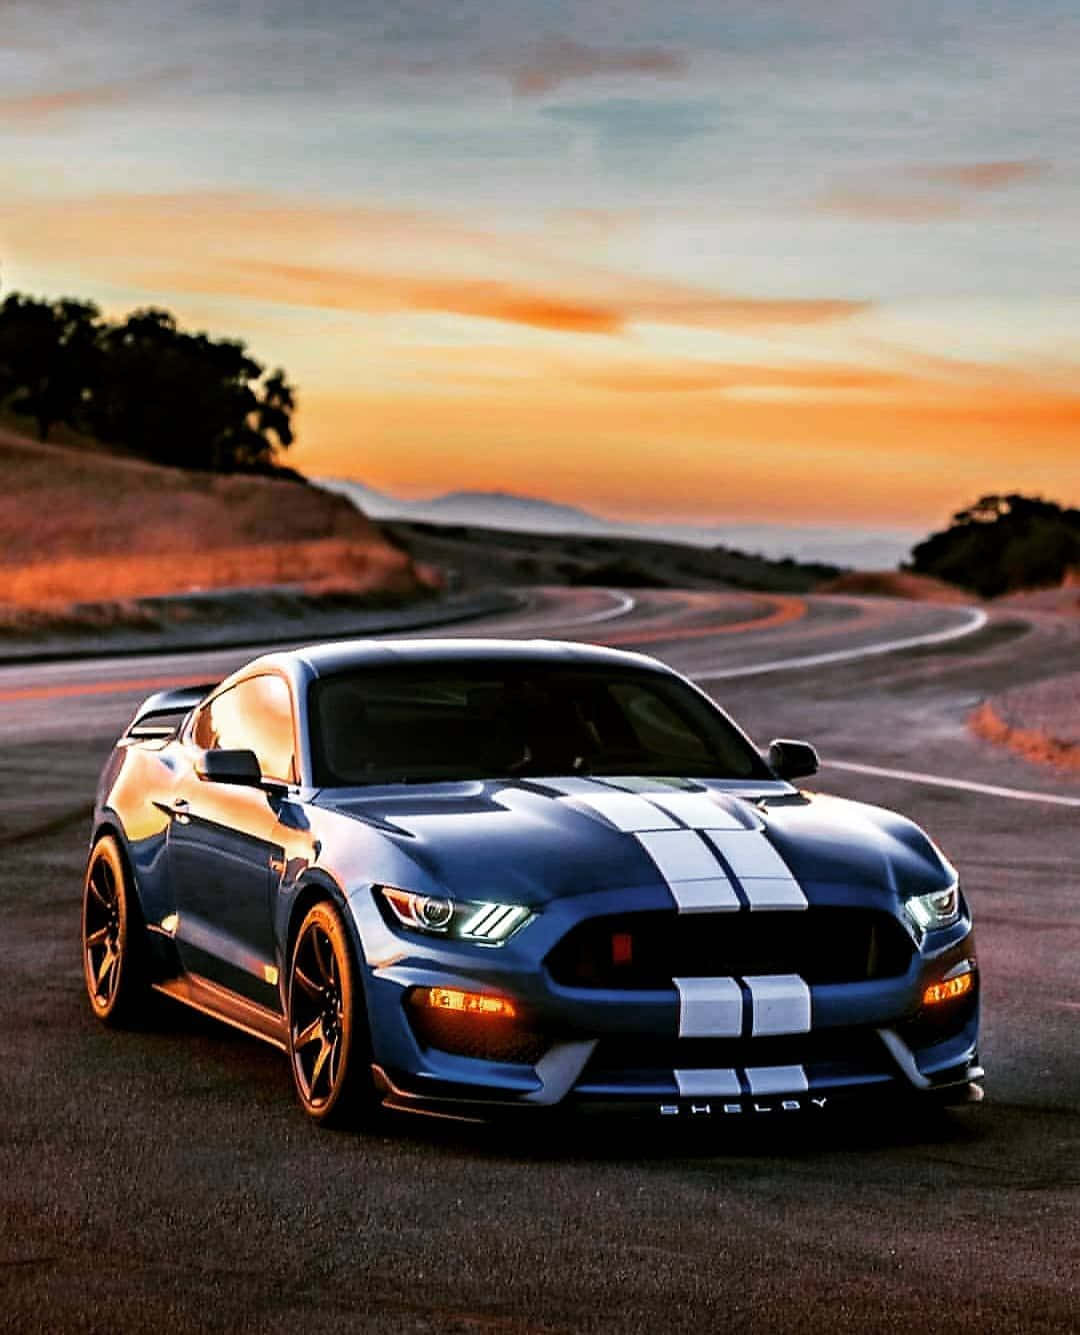 Ford Mustang Gt350r - Superiority In Style And Speed Wallpaper